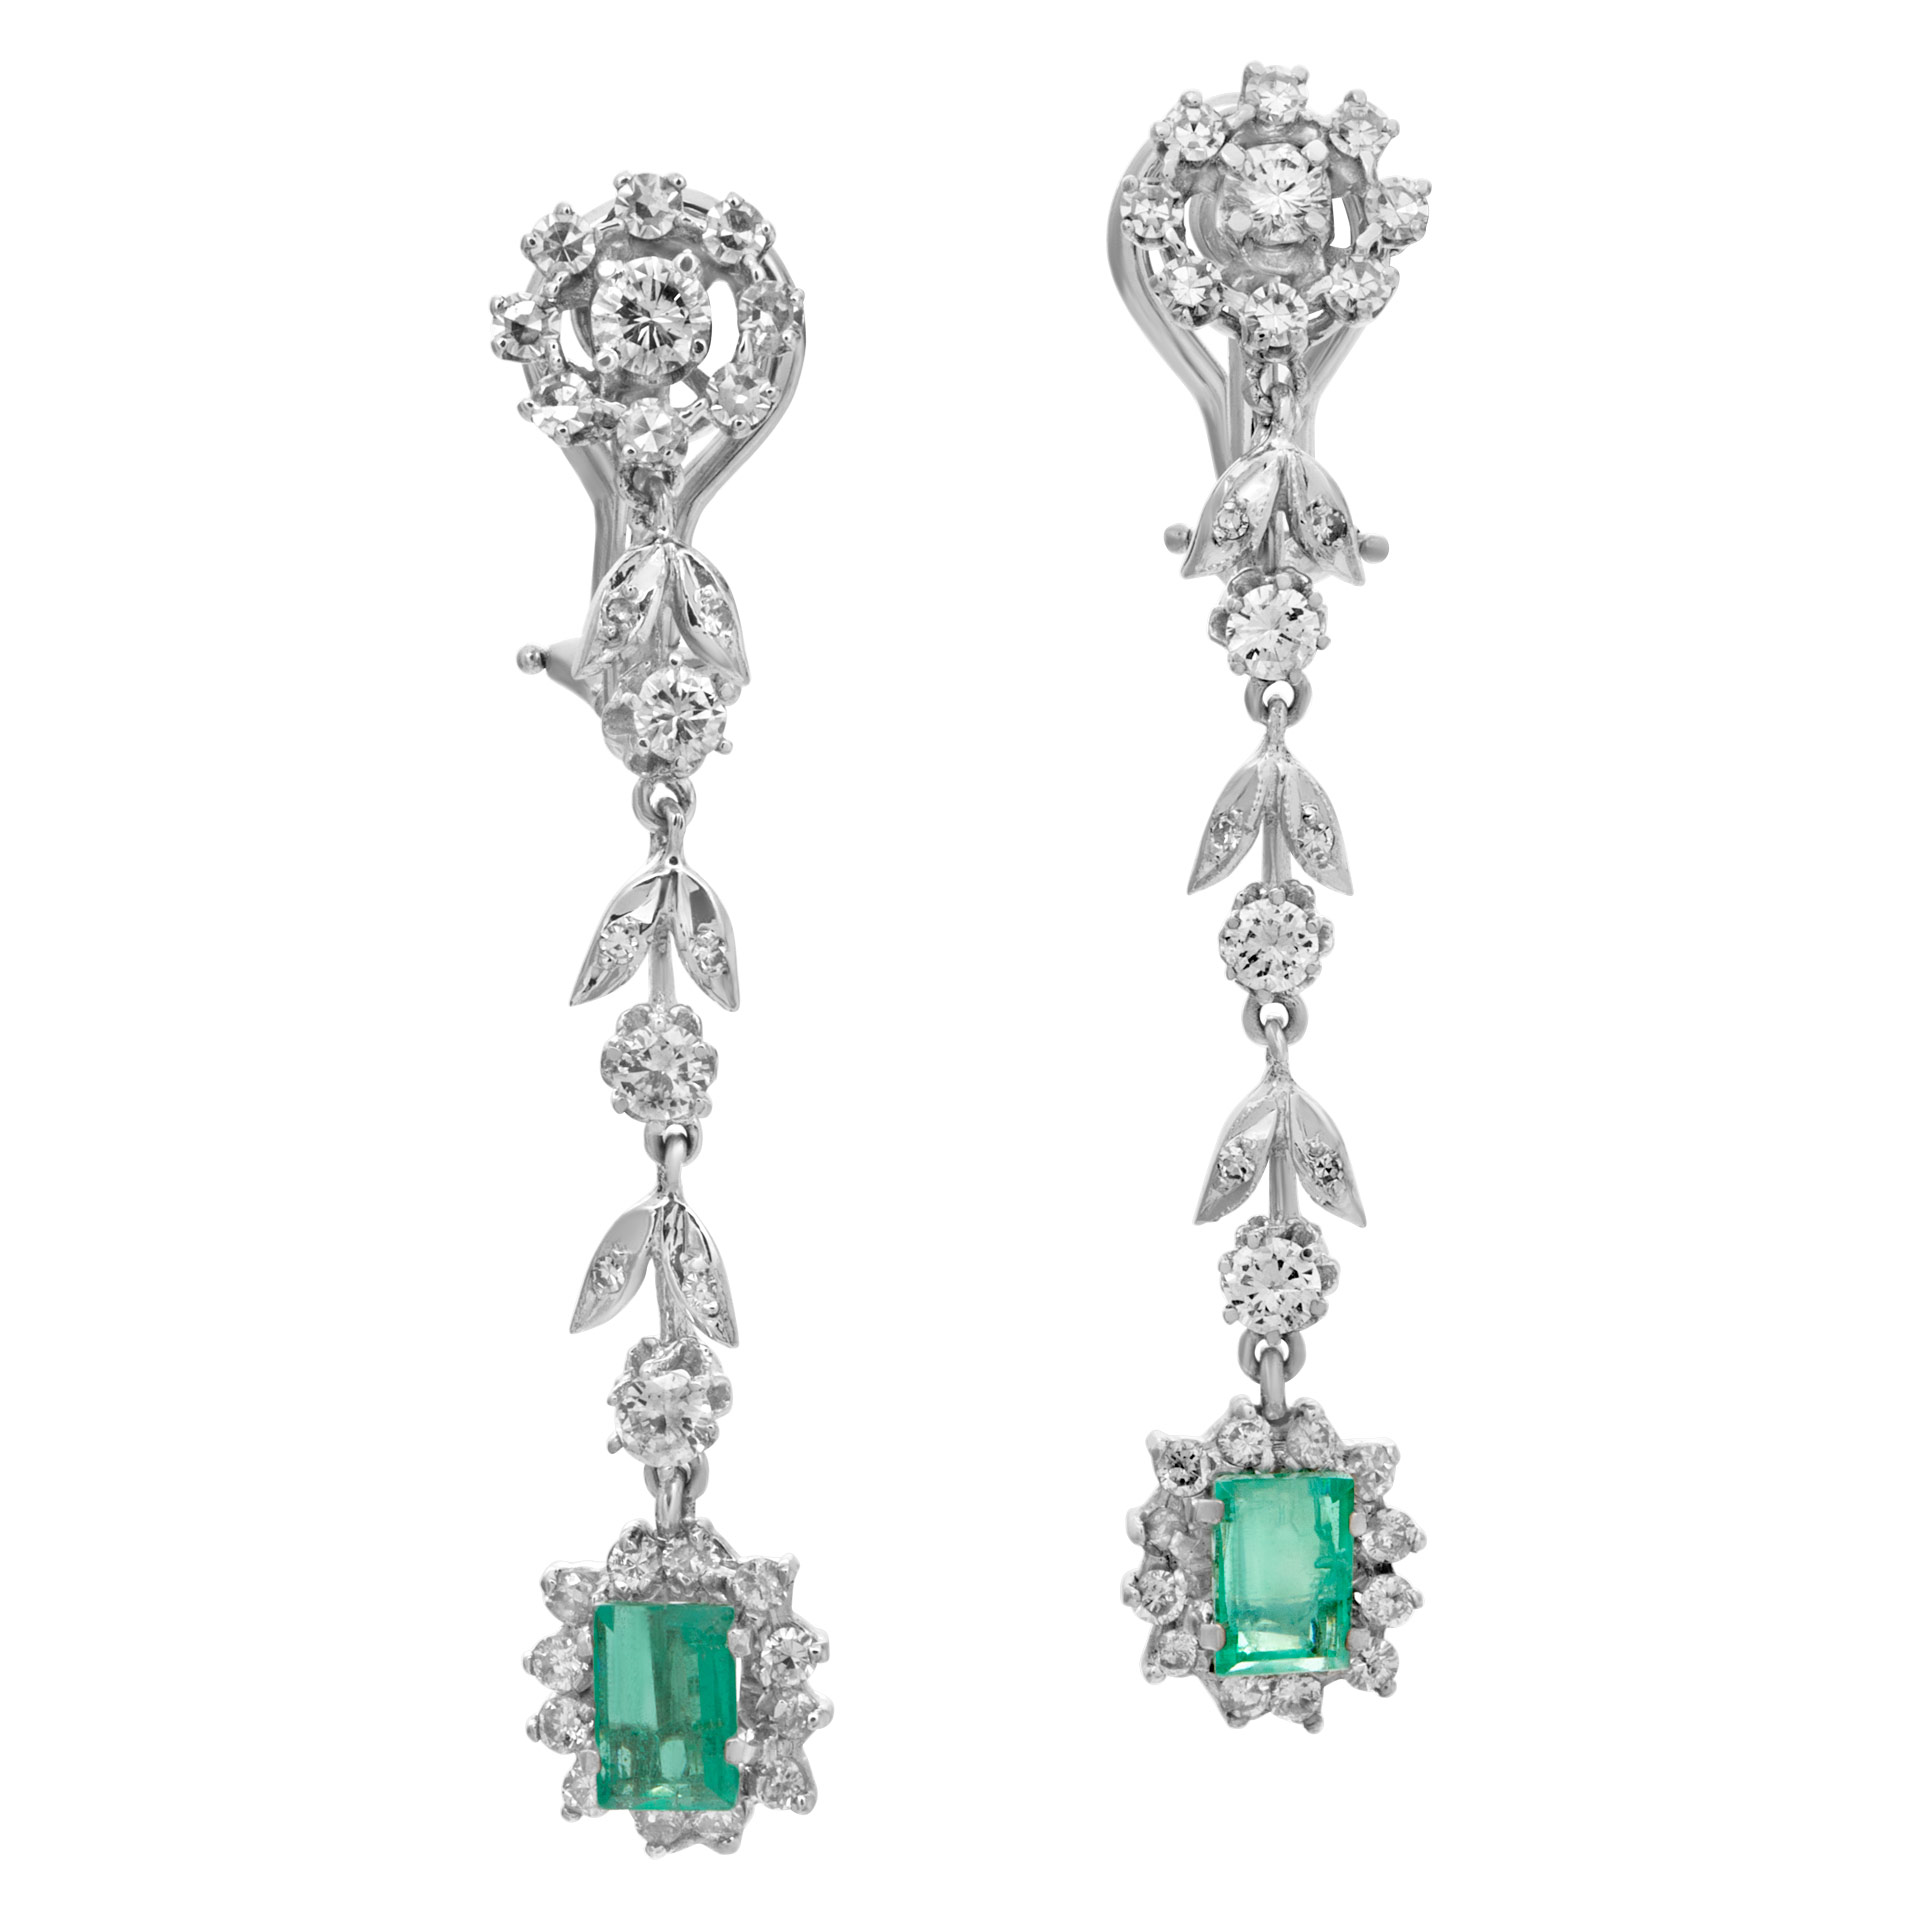 Dangling earrings with over 1 carat in diamonds and 0.50 carat in emeralds